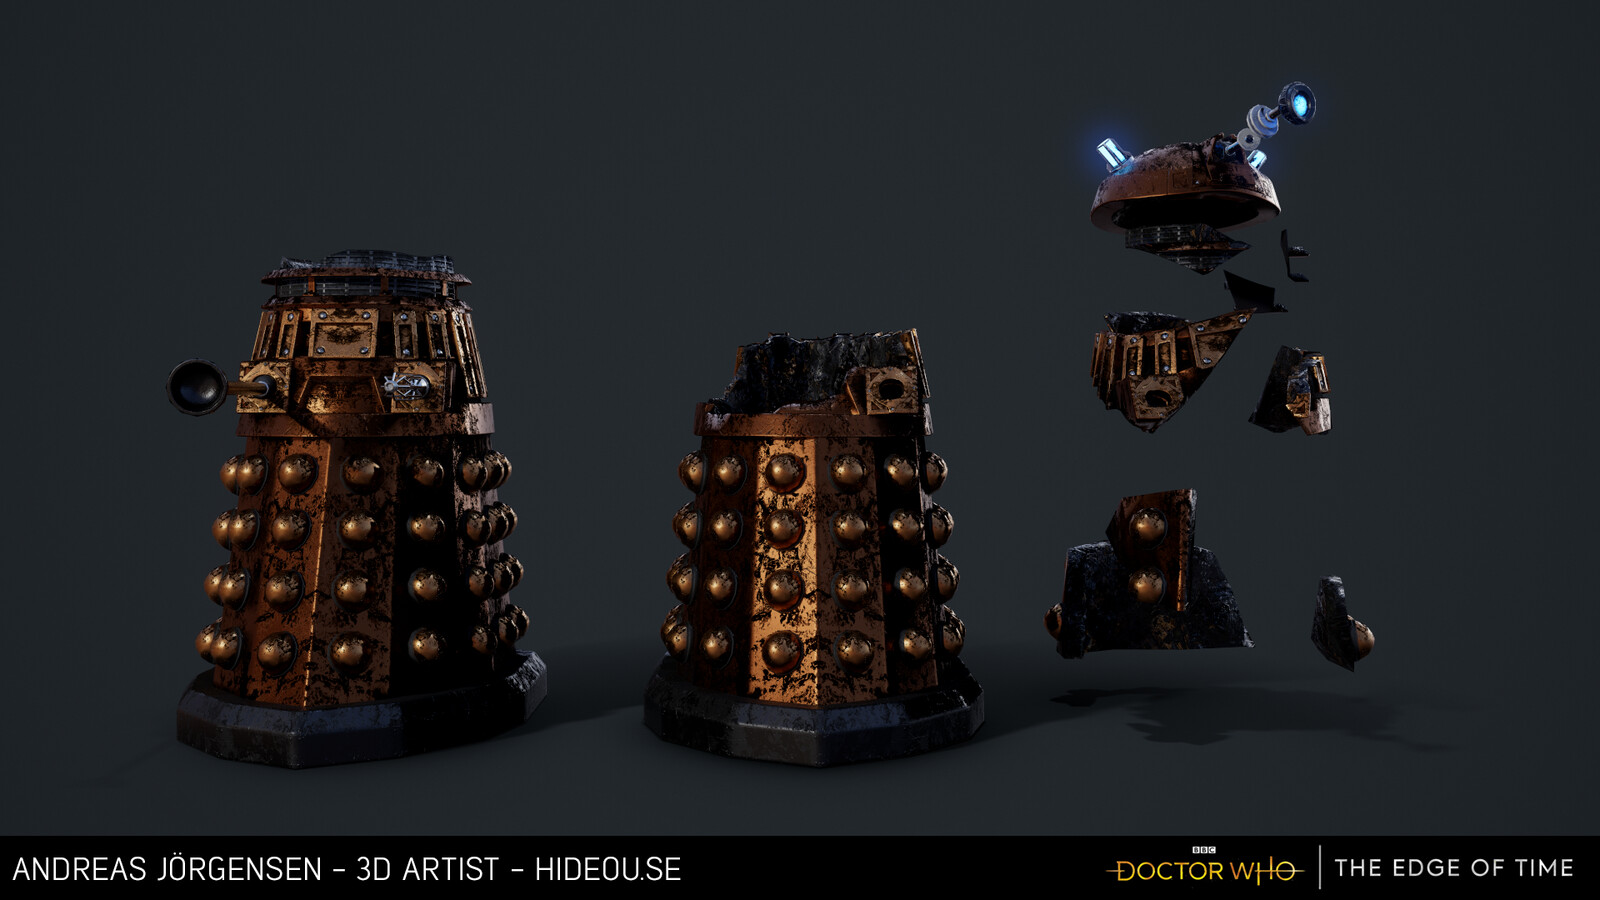 Various states of destroyed Dalek, physics debris on the right